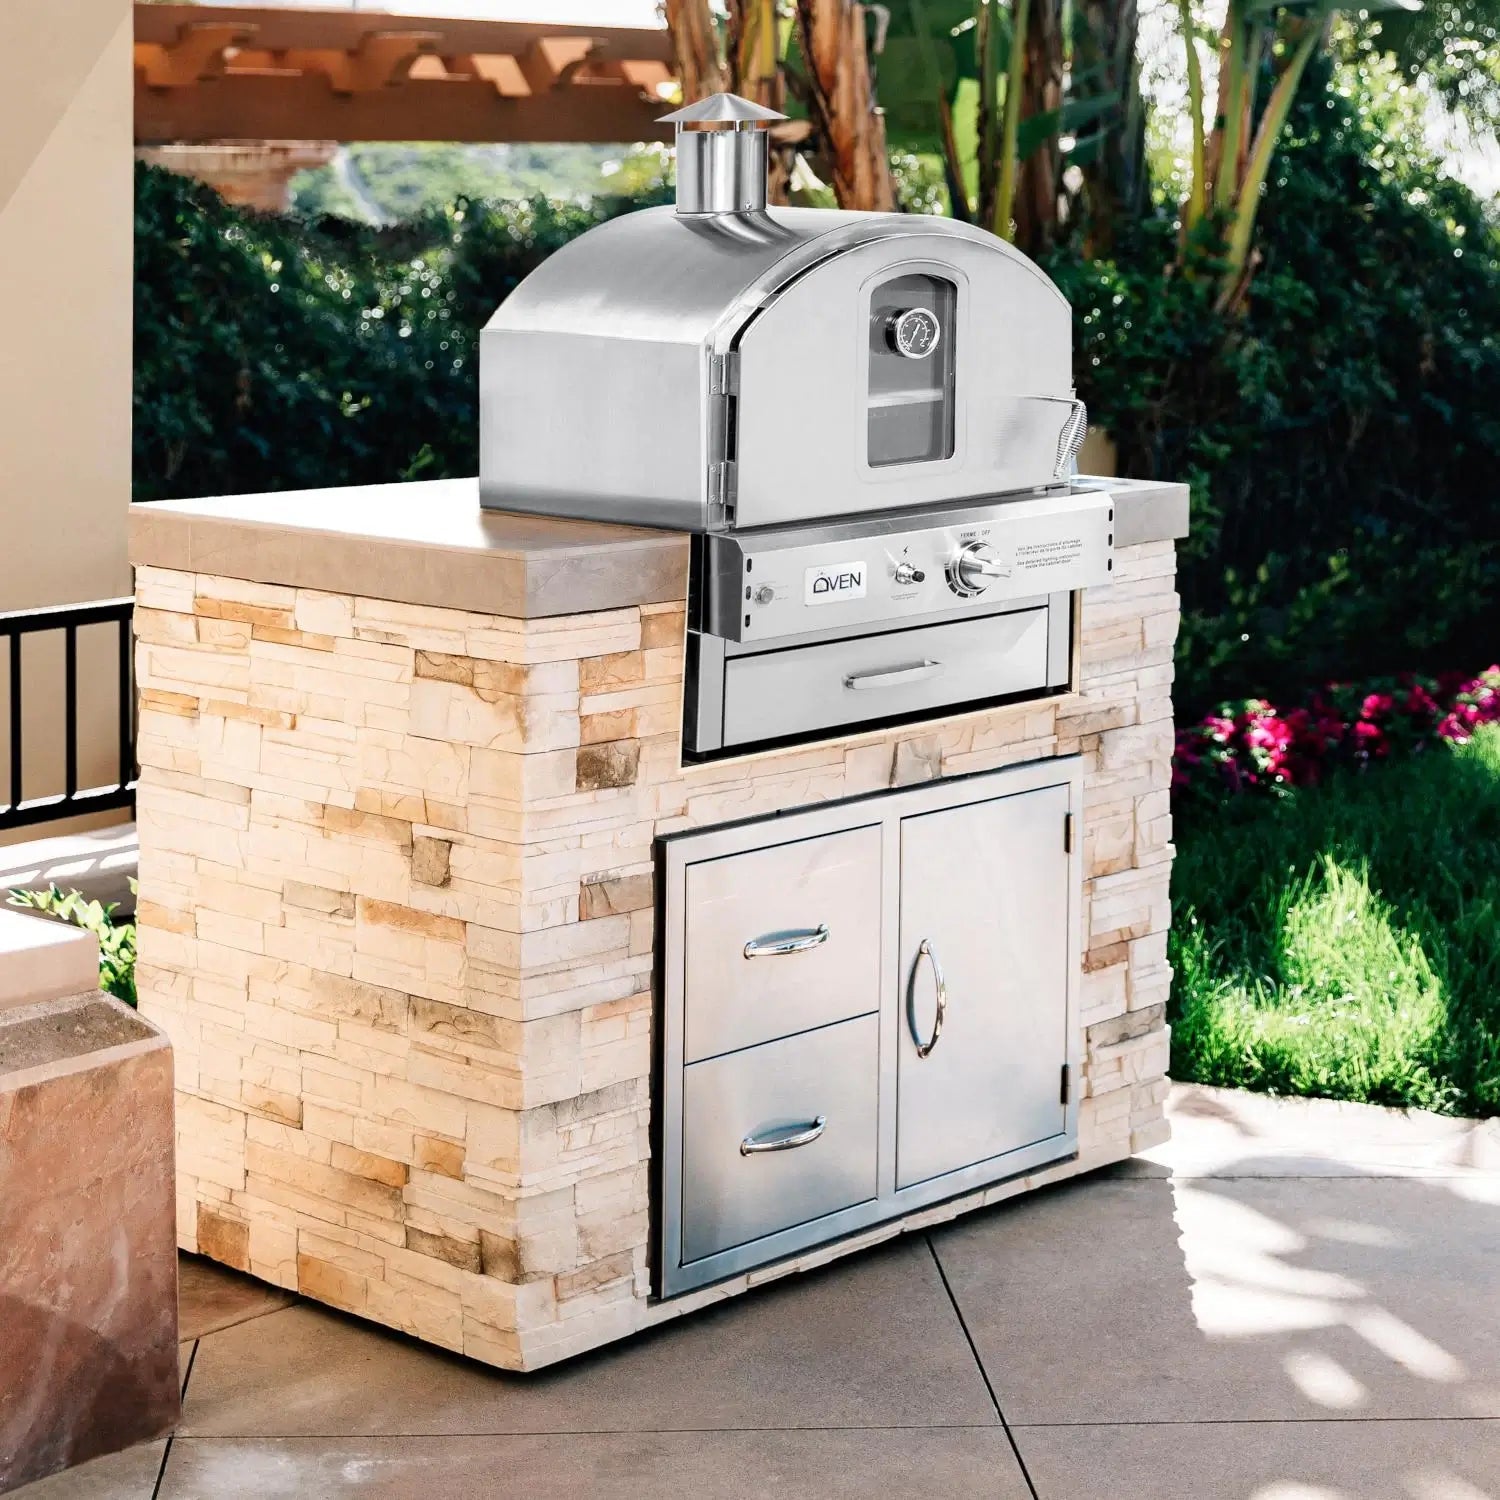 The SUMMERSET countertop or built-in pizza oven this cover is designed for